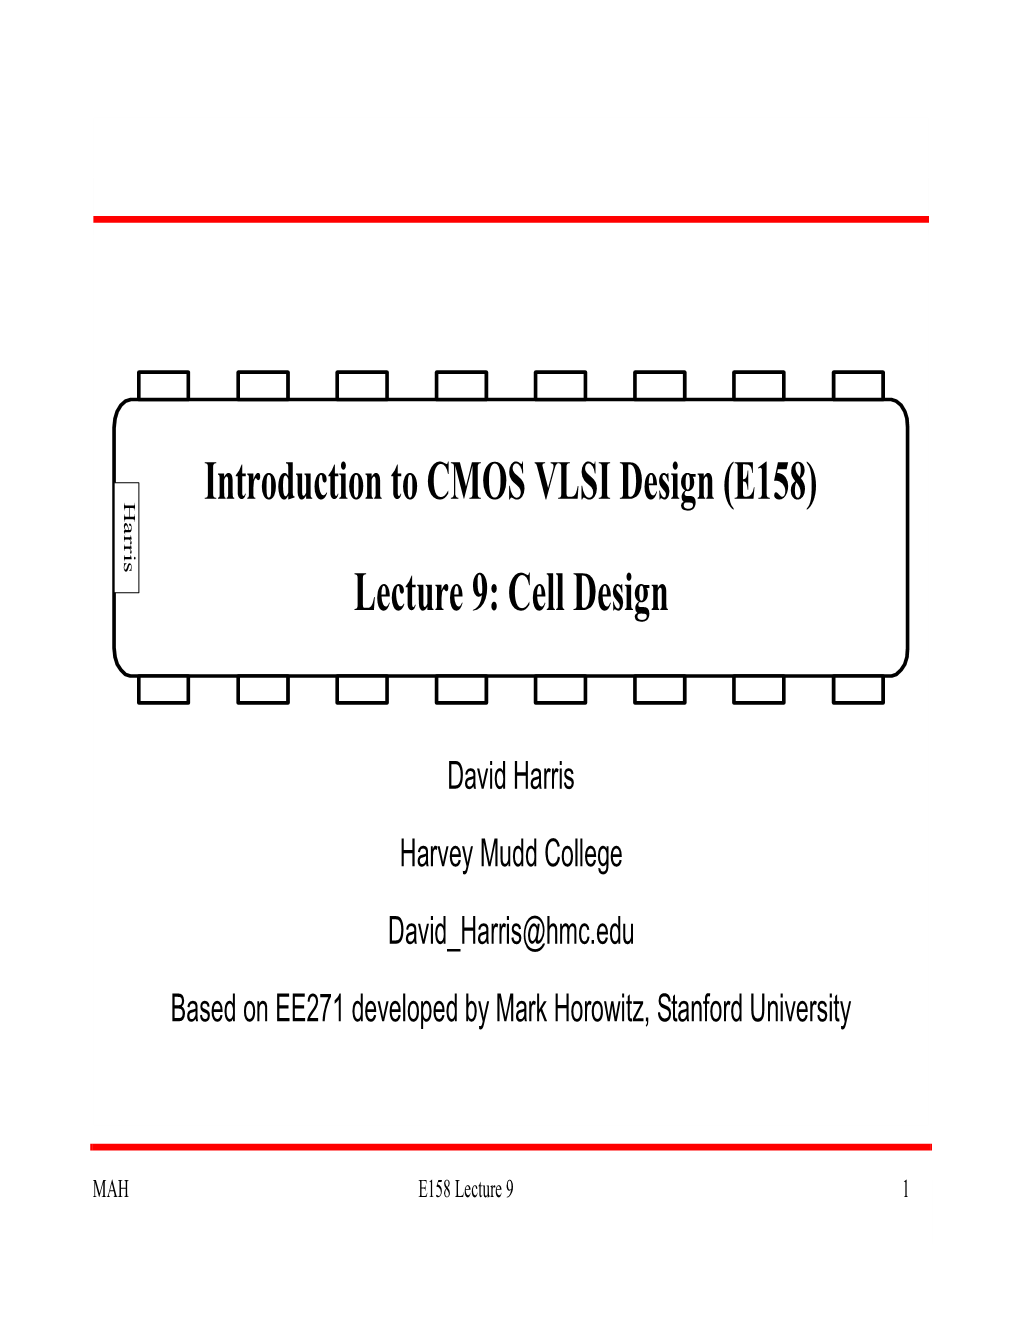 Introduction to CMOS VLSI Design (E158) Lecture 9: Cell Design